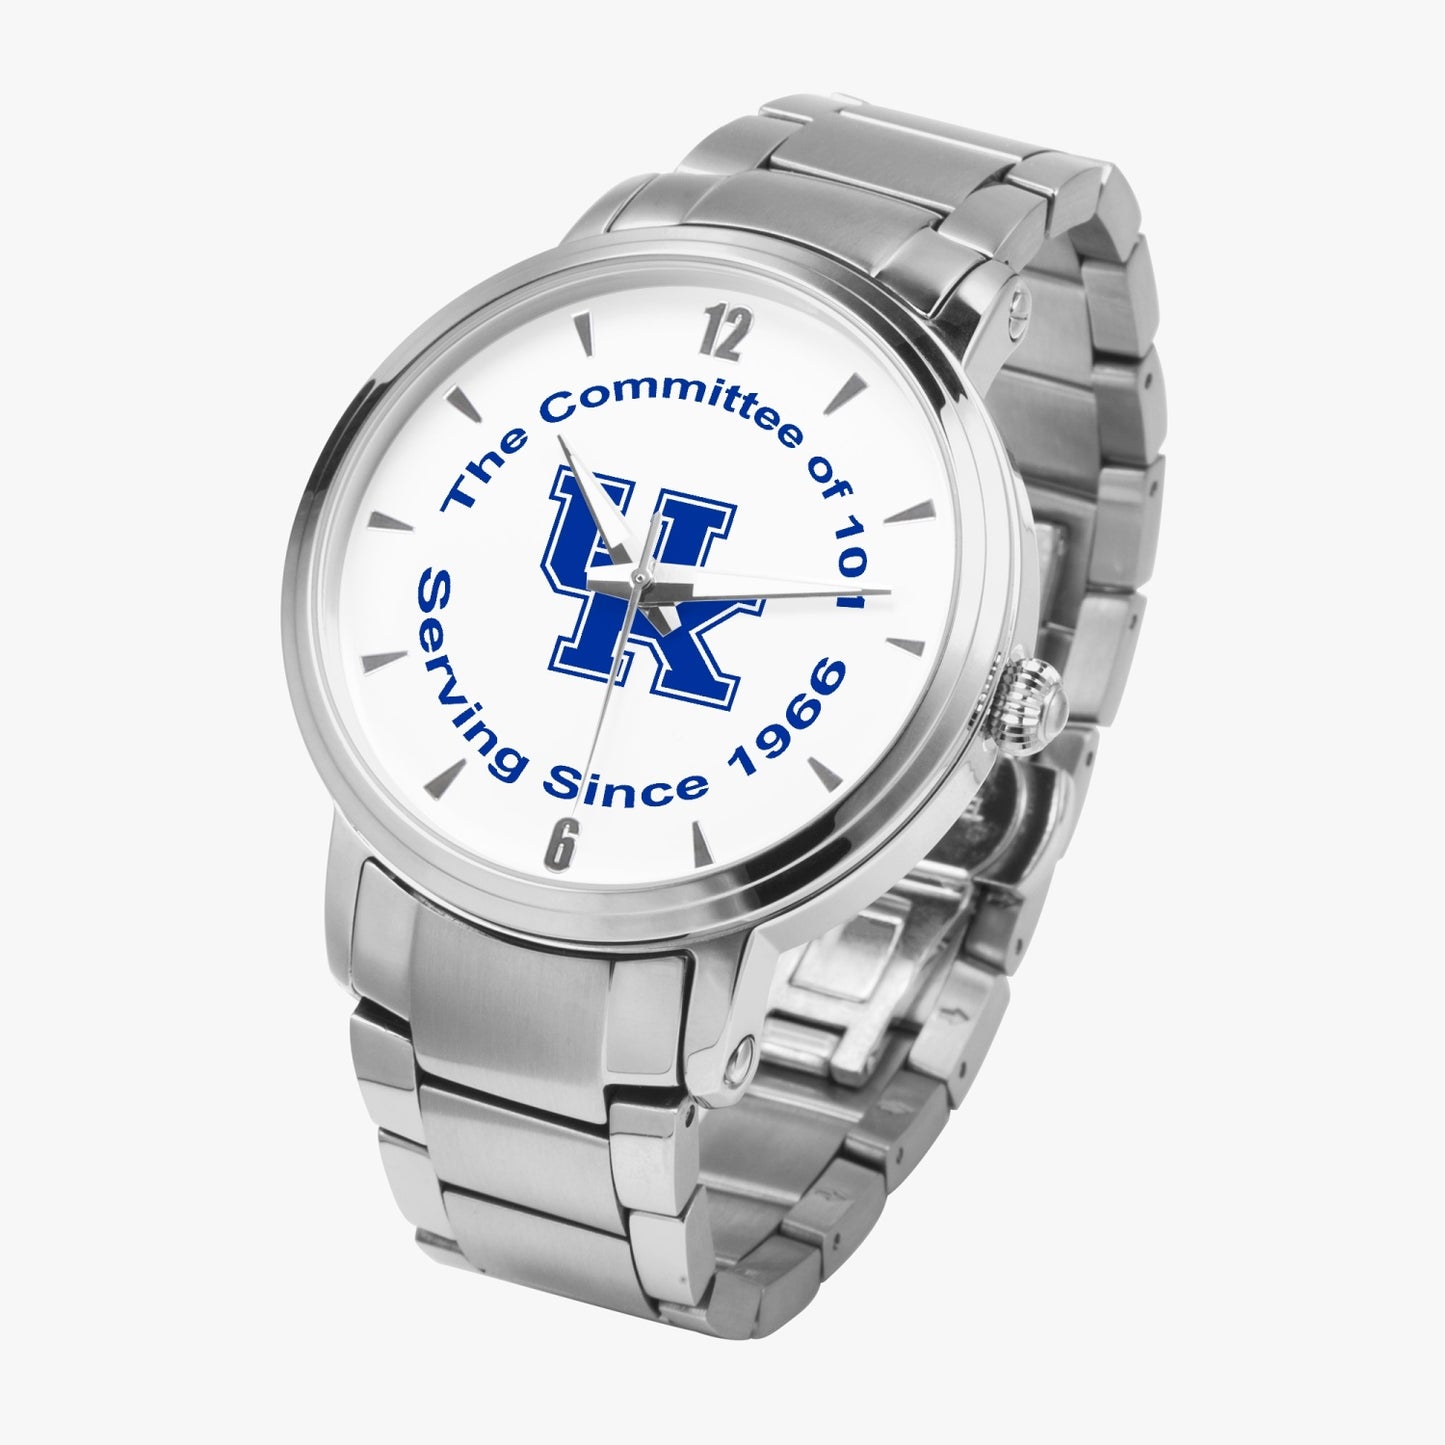 "The Rupp - Steel Band" - The Committee of 101 Steel Strap Automatic Watch